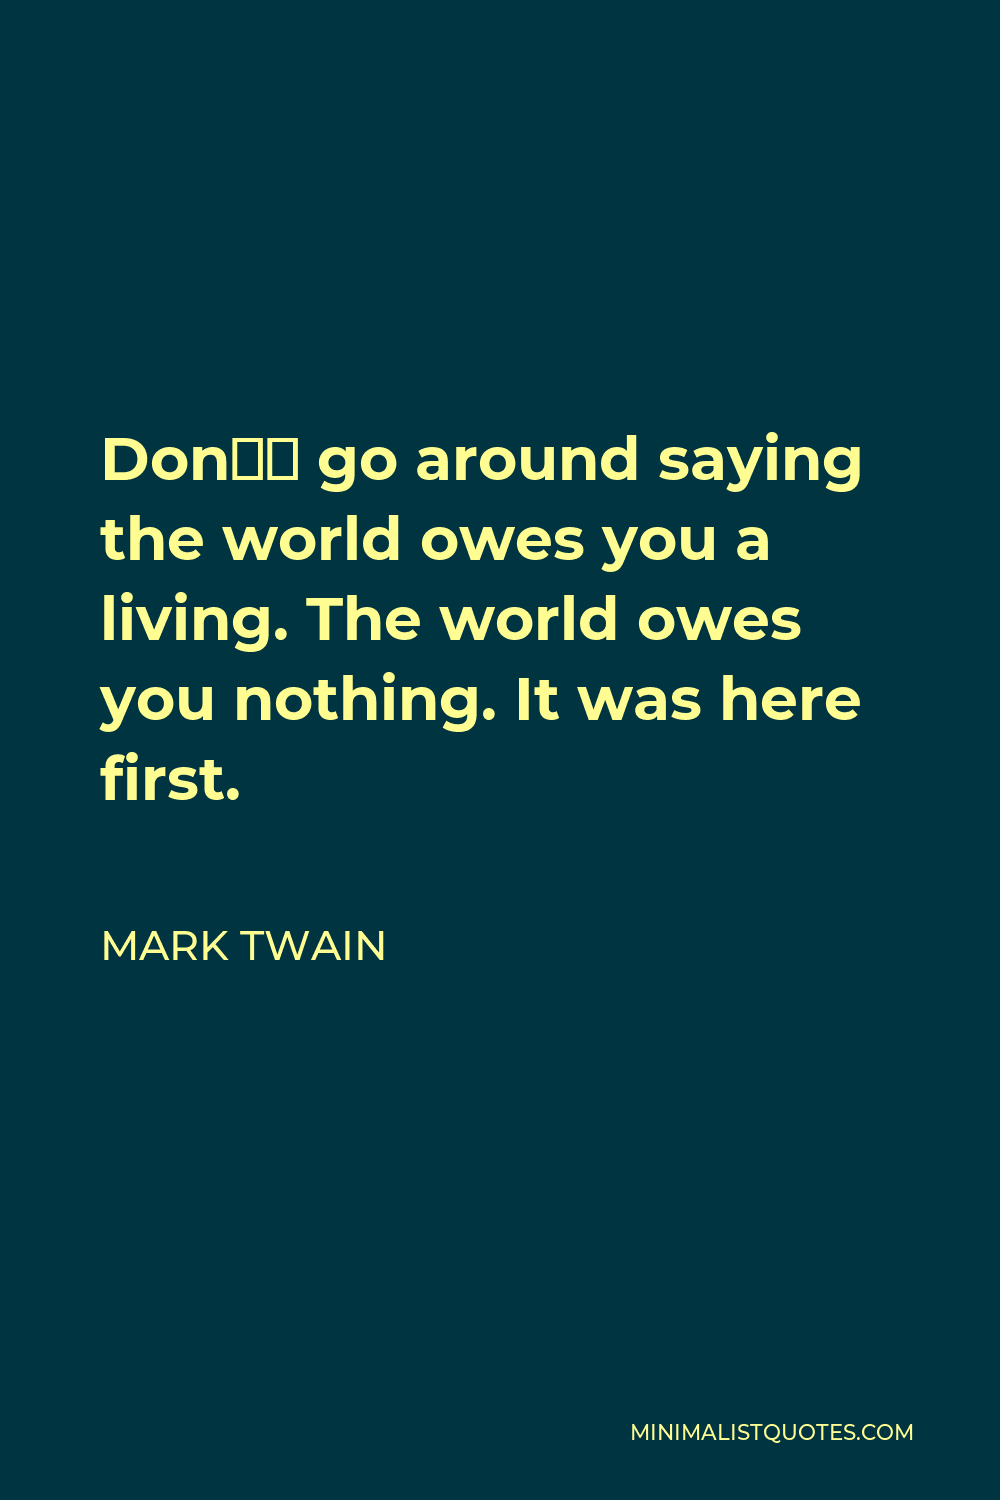 Mark Twain Quote - Don’t go around saying the world owes you a living. The world owes you nothing. It was here first.